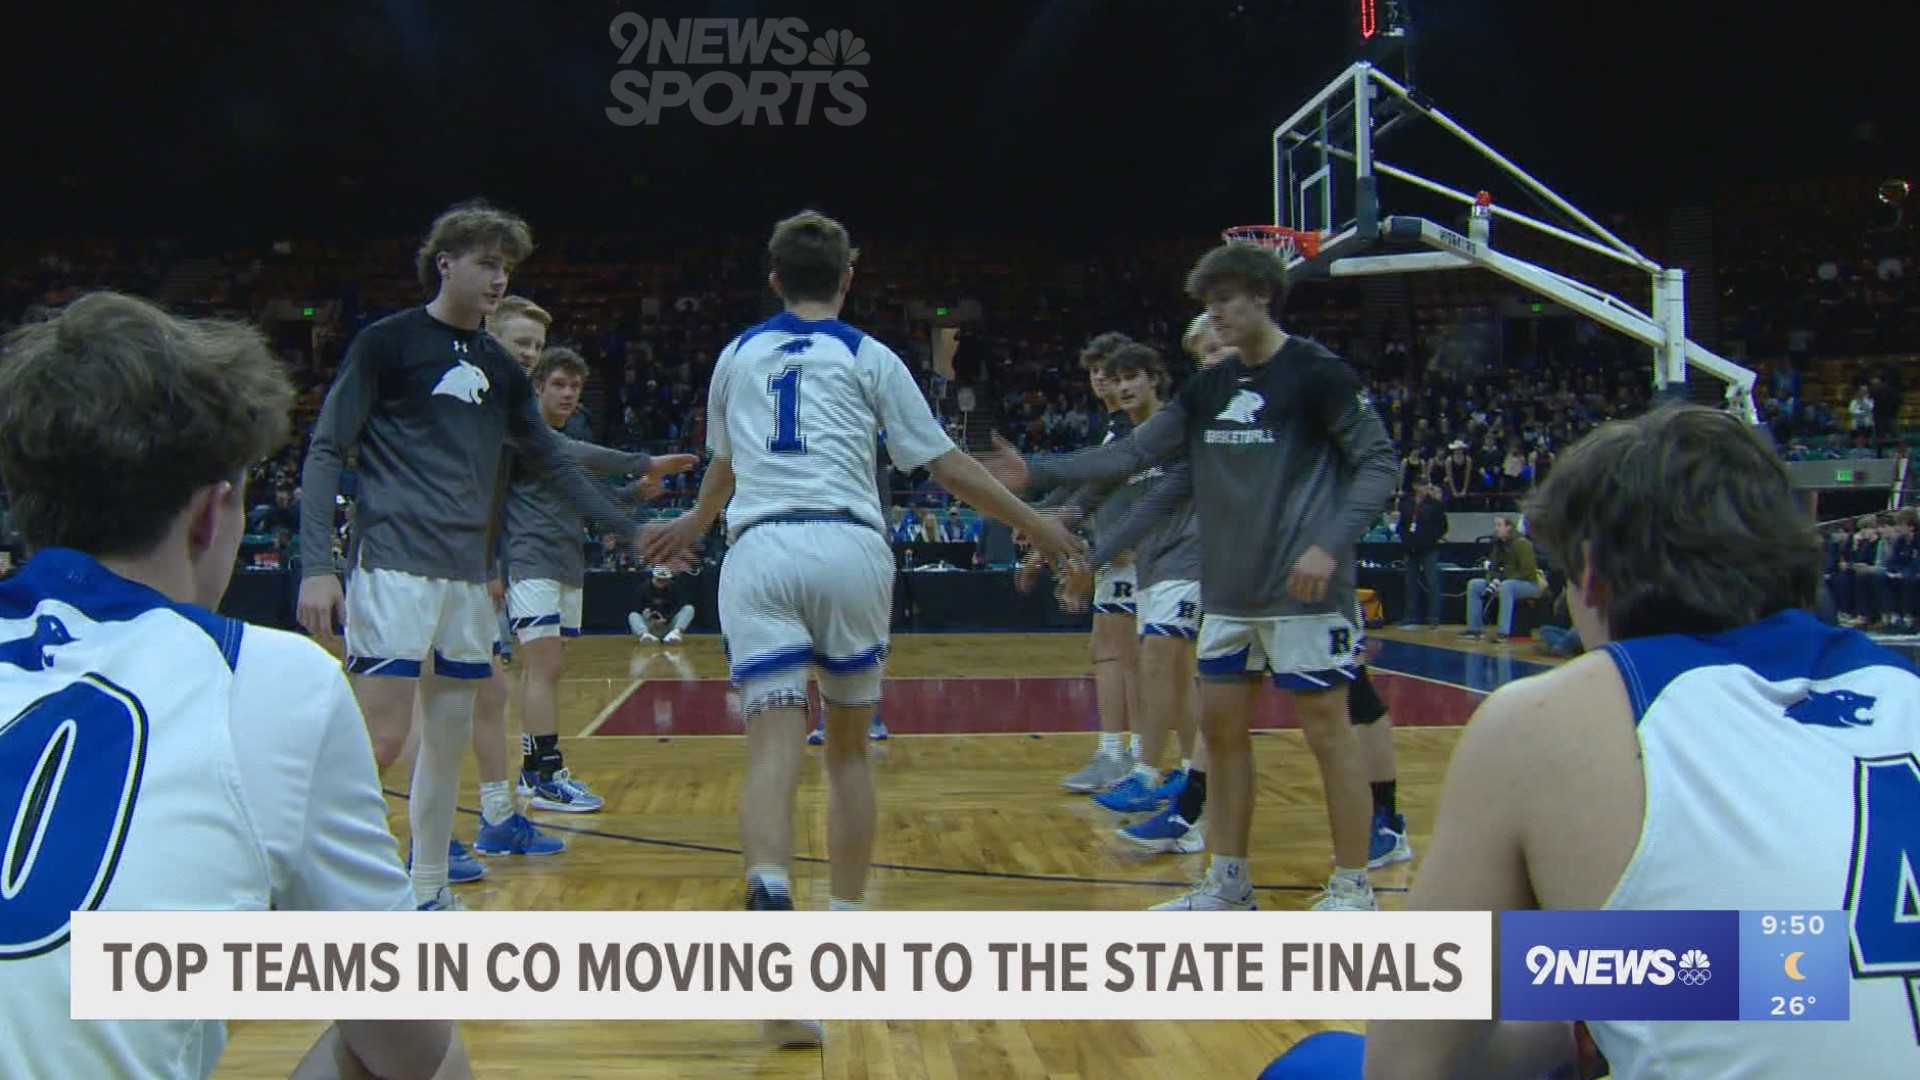 The Colorado high school basketball season will come to an end Saturday with state championship games across the state!